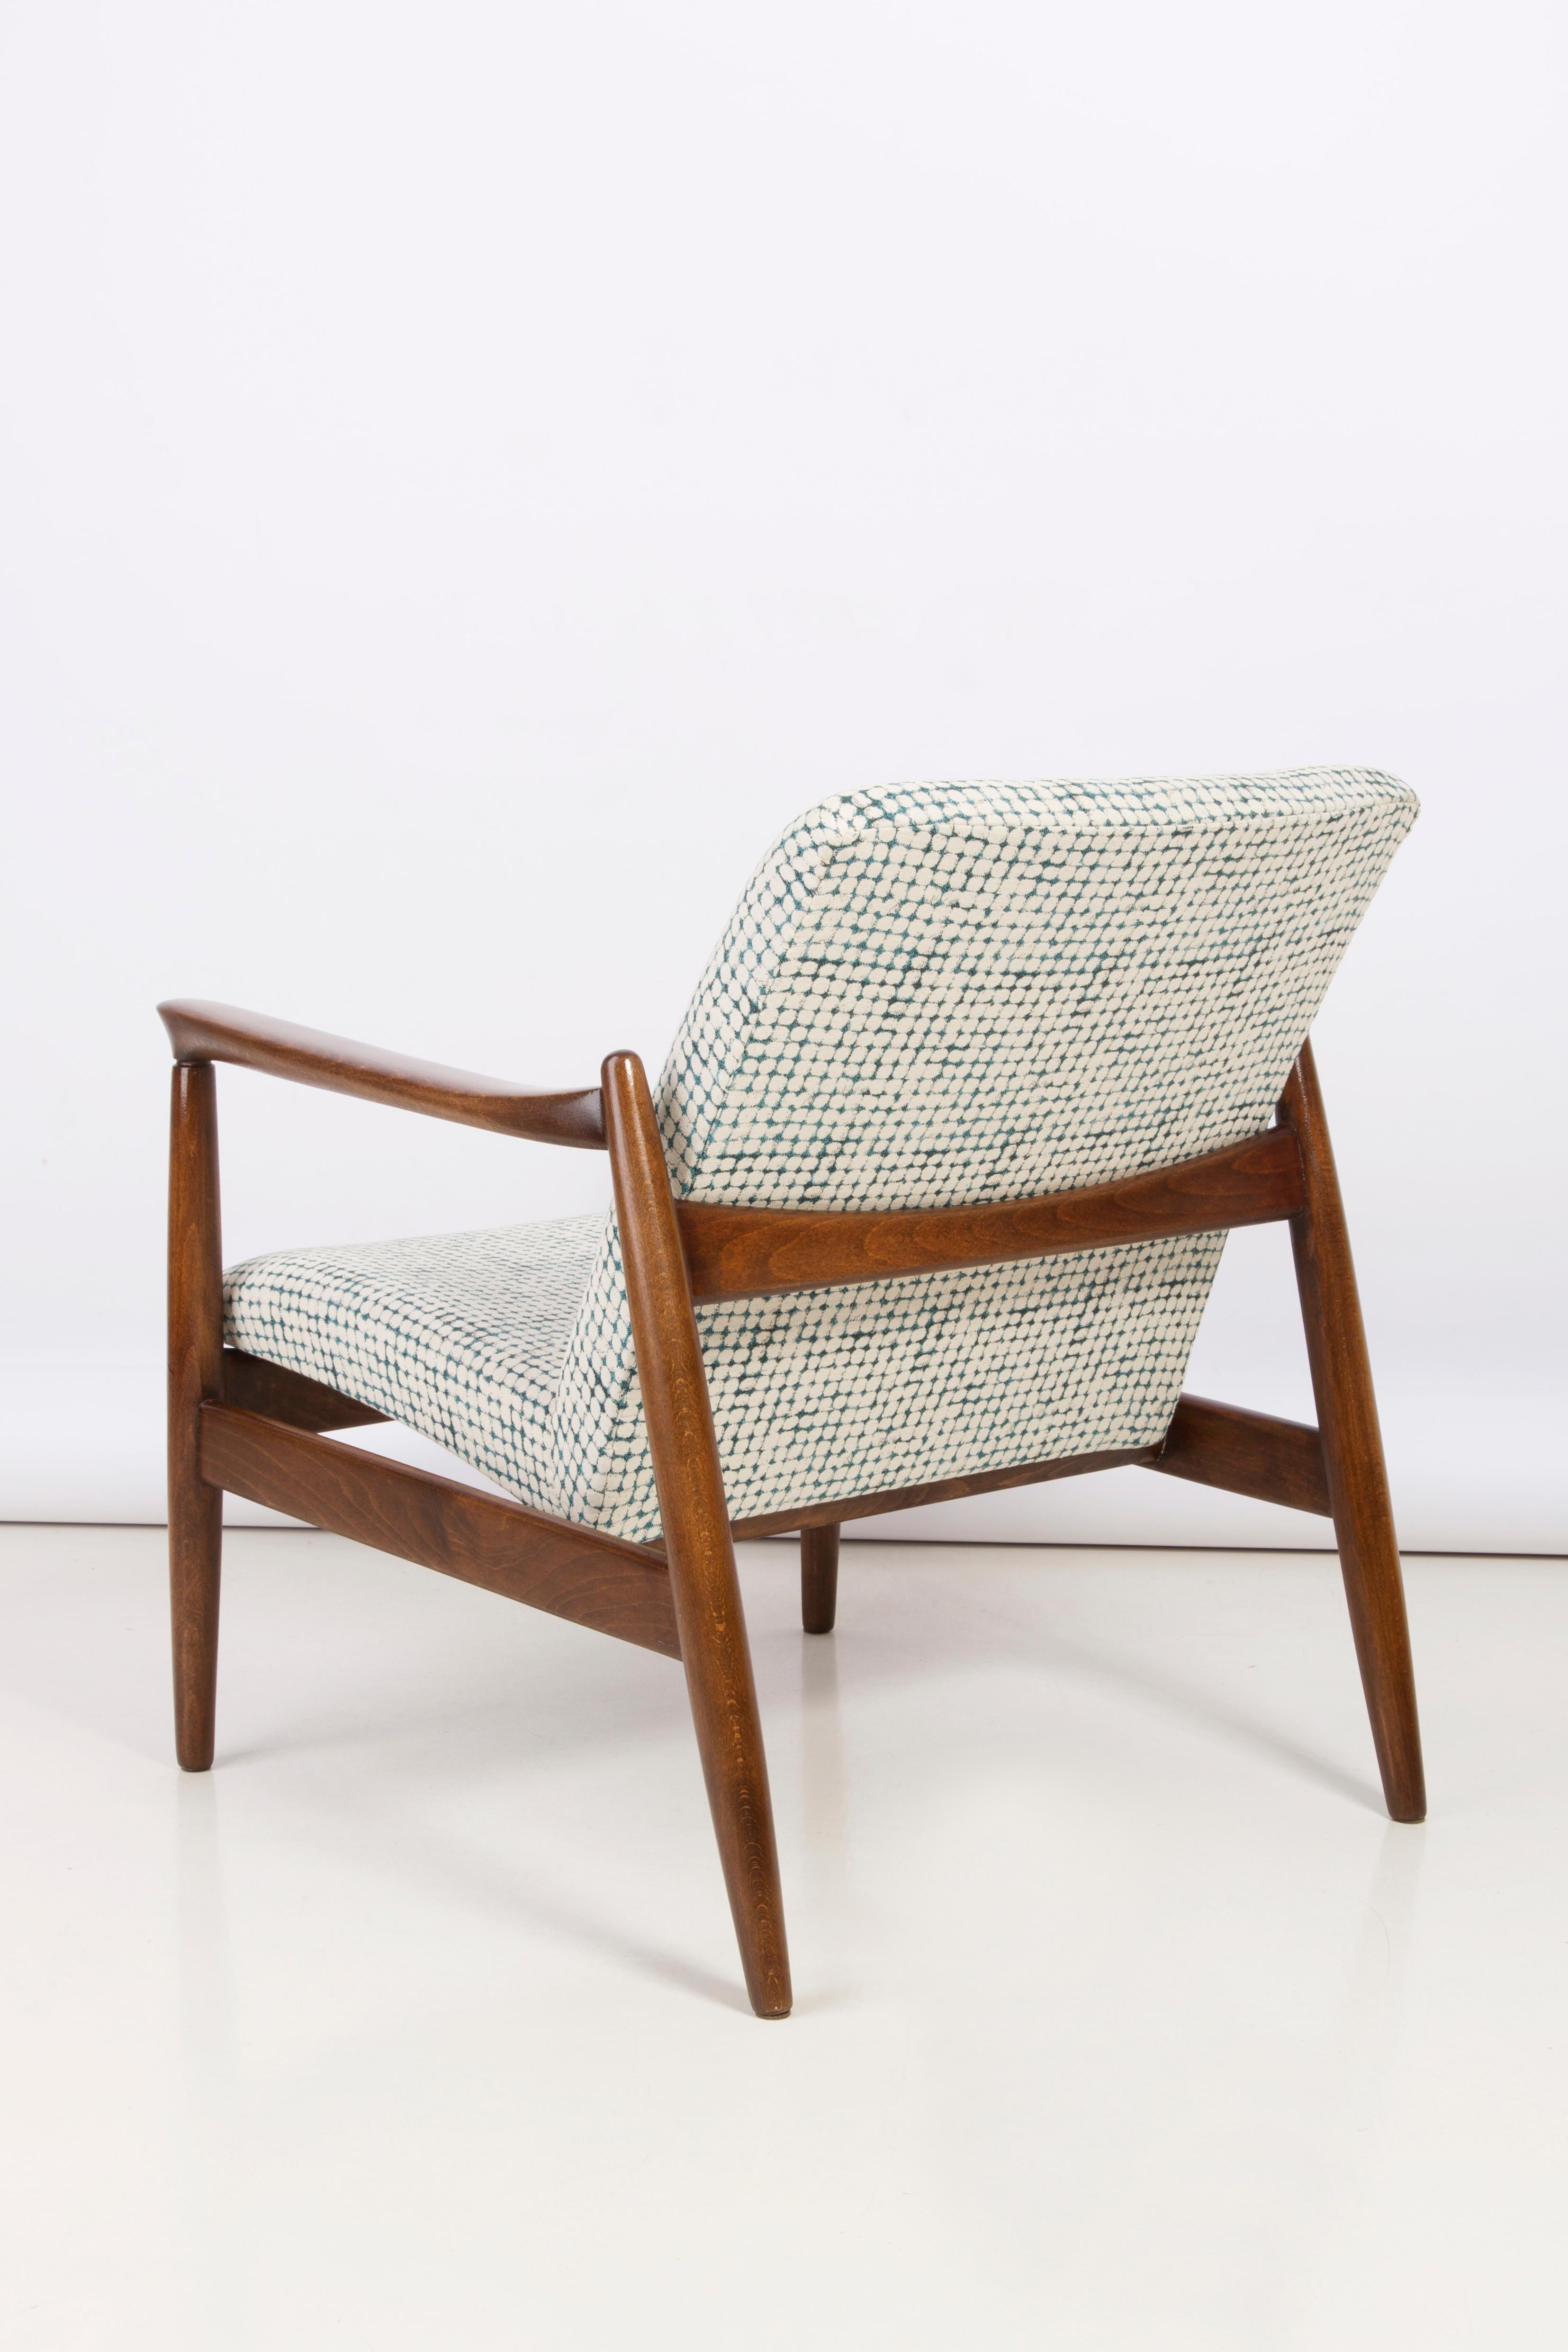 White and Aqua Vintage Armchair and Stool, Edmund Homa, 1960s For Sale 1